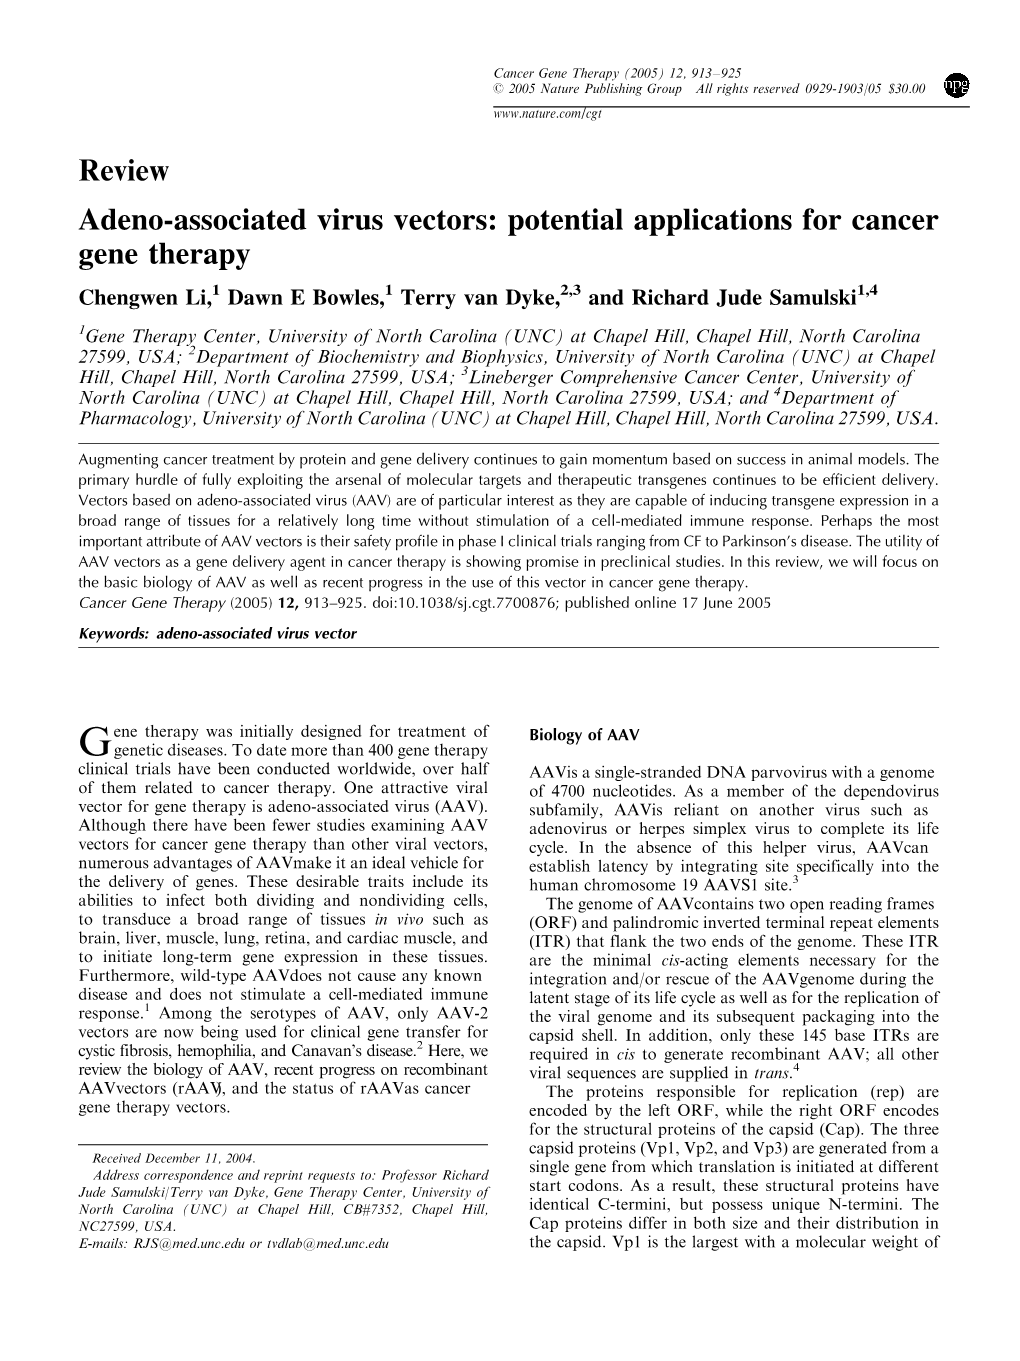 Potential Applications for Cancer Gene Therapy